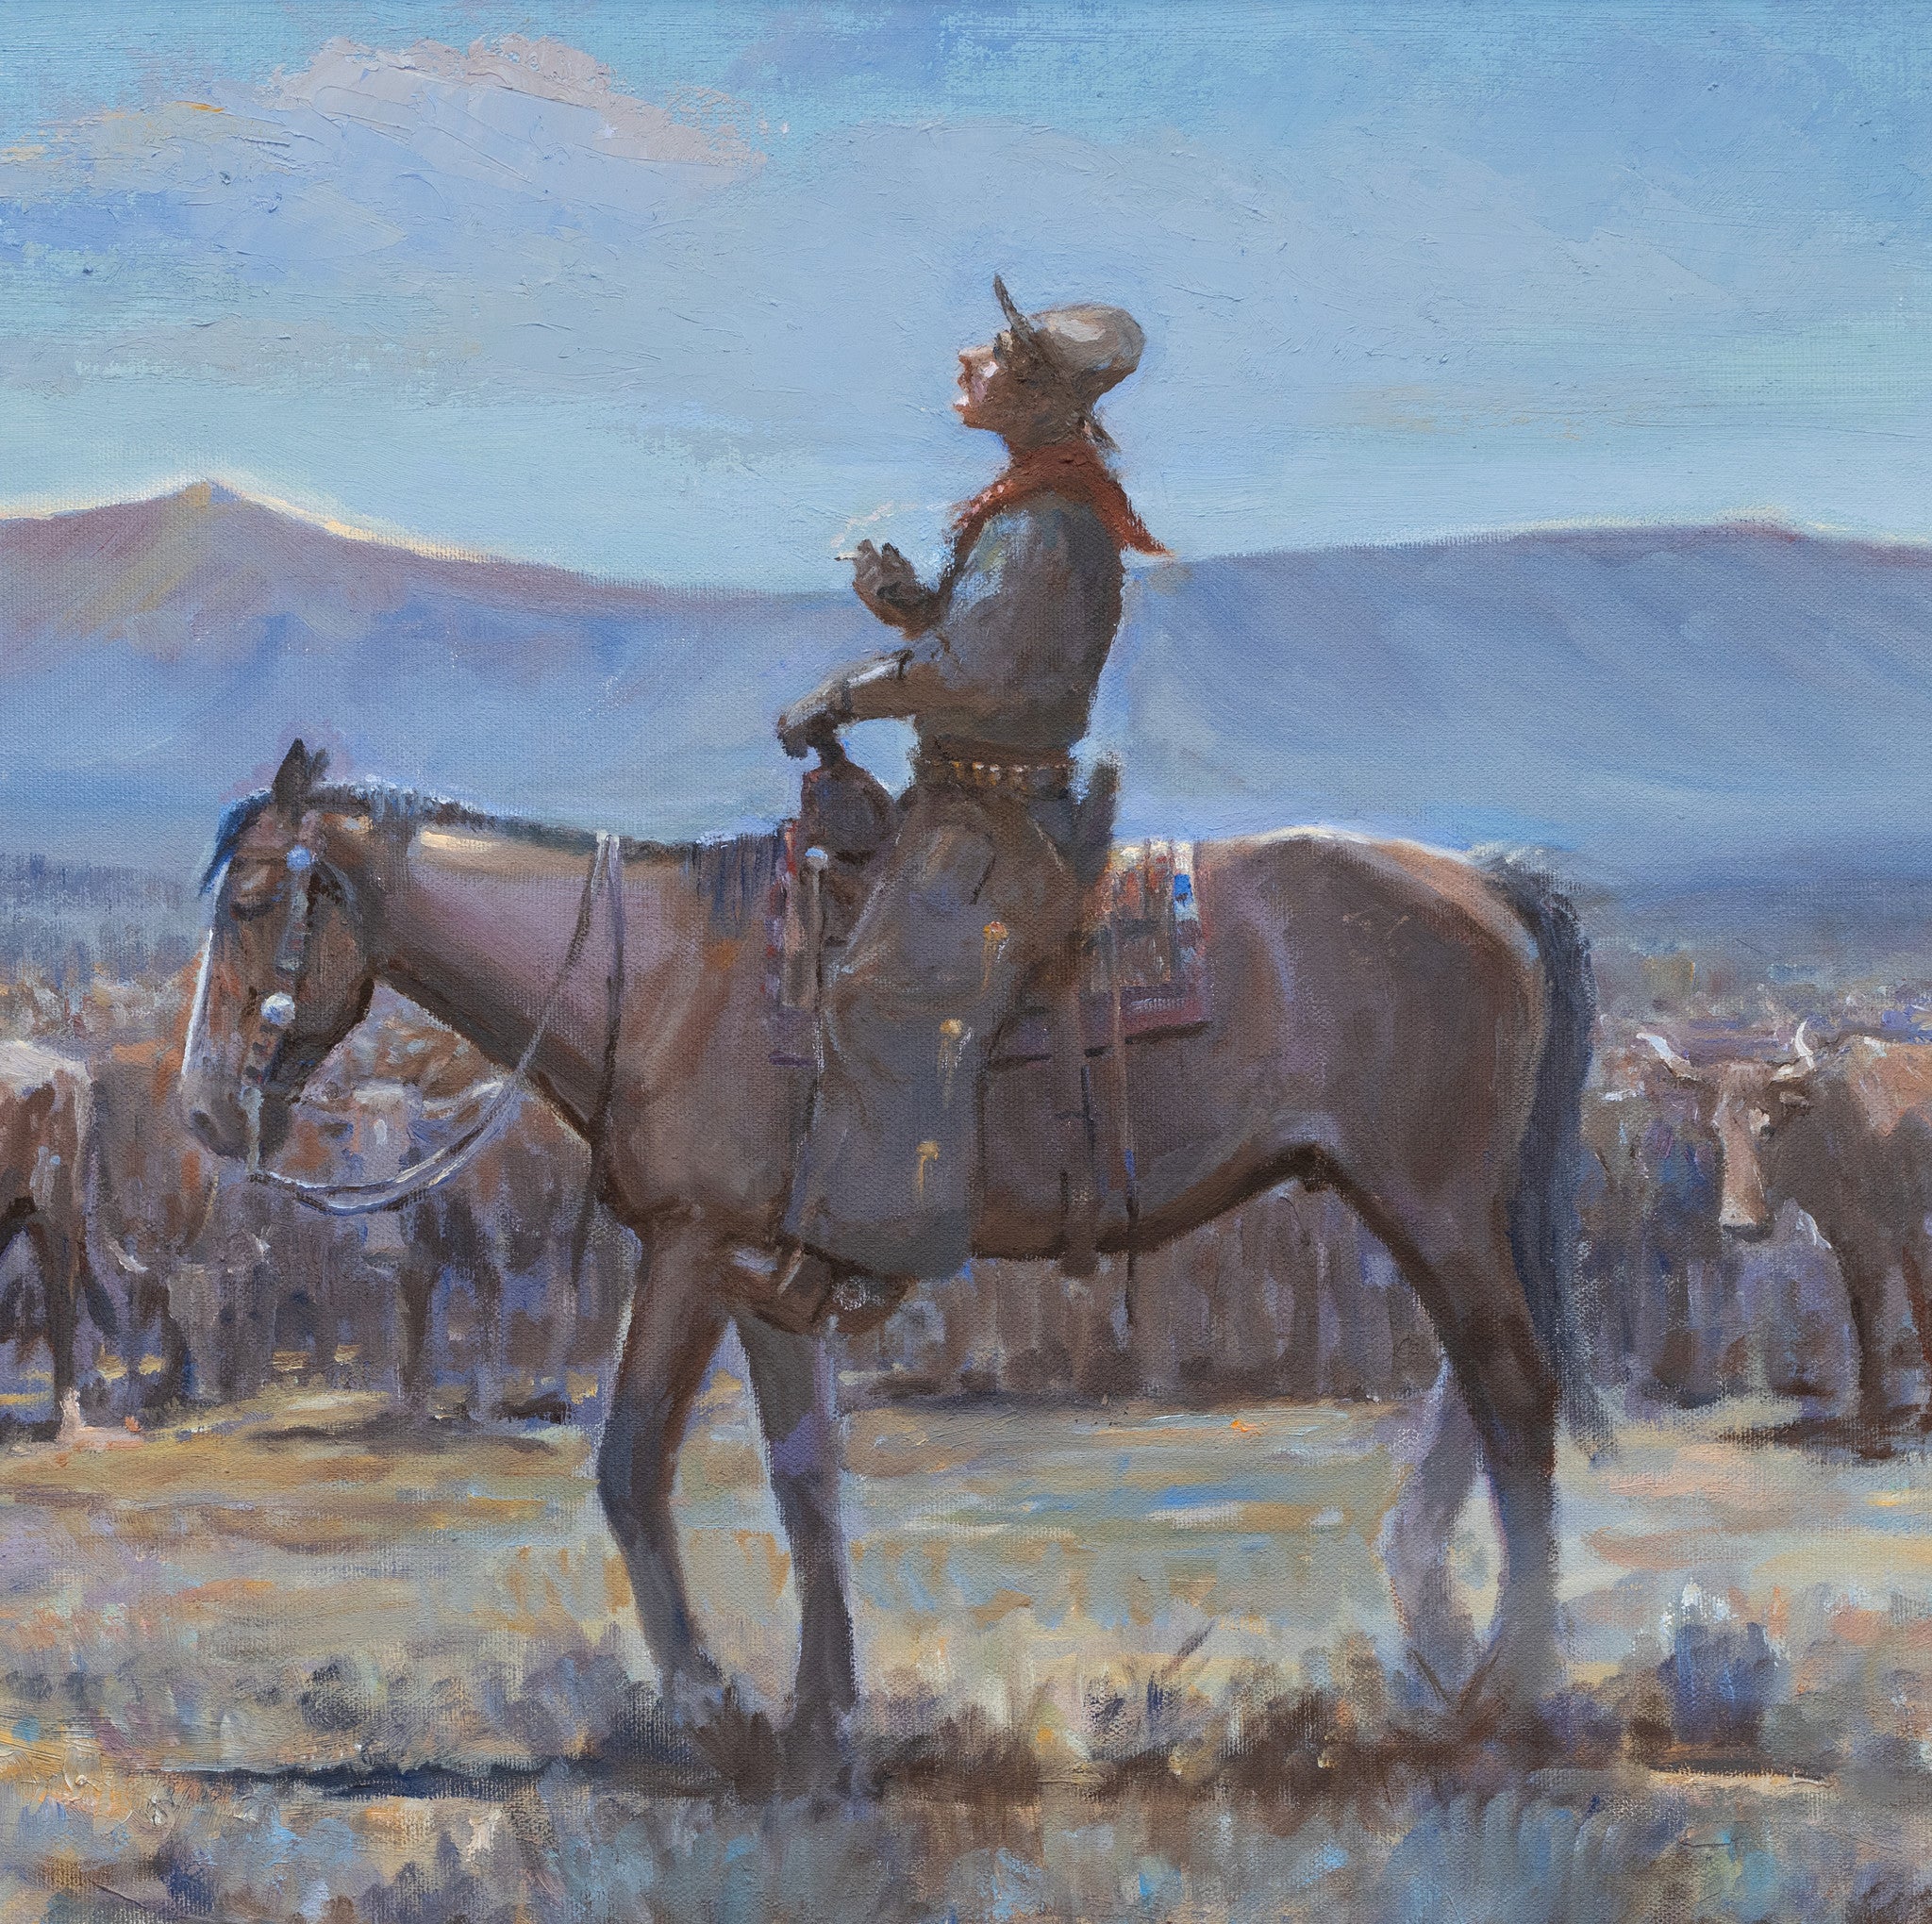 Night Herder by Jim Carkhuff